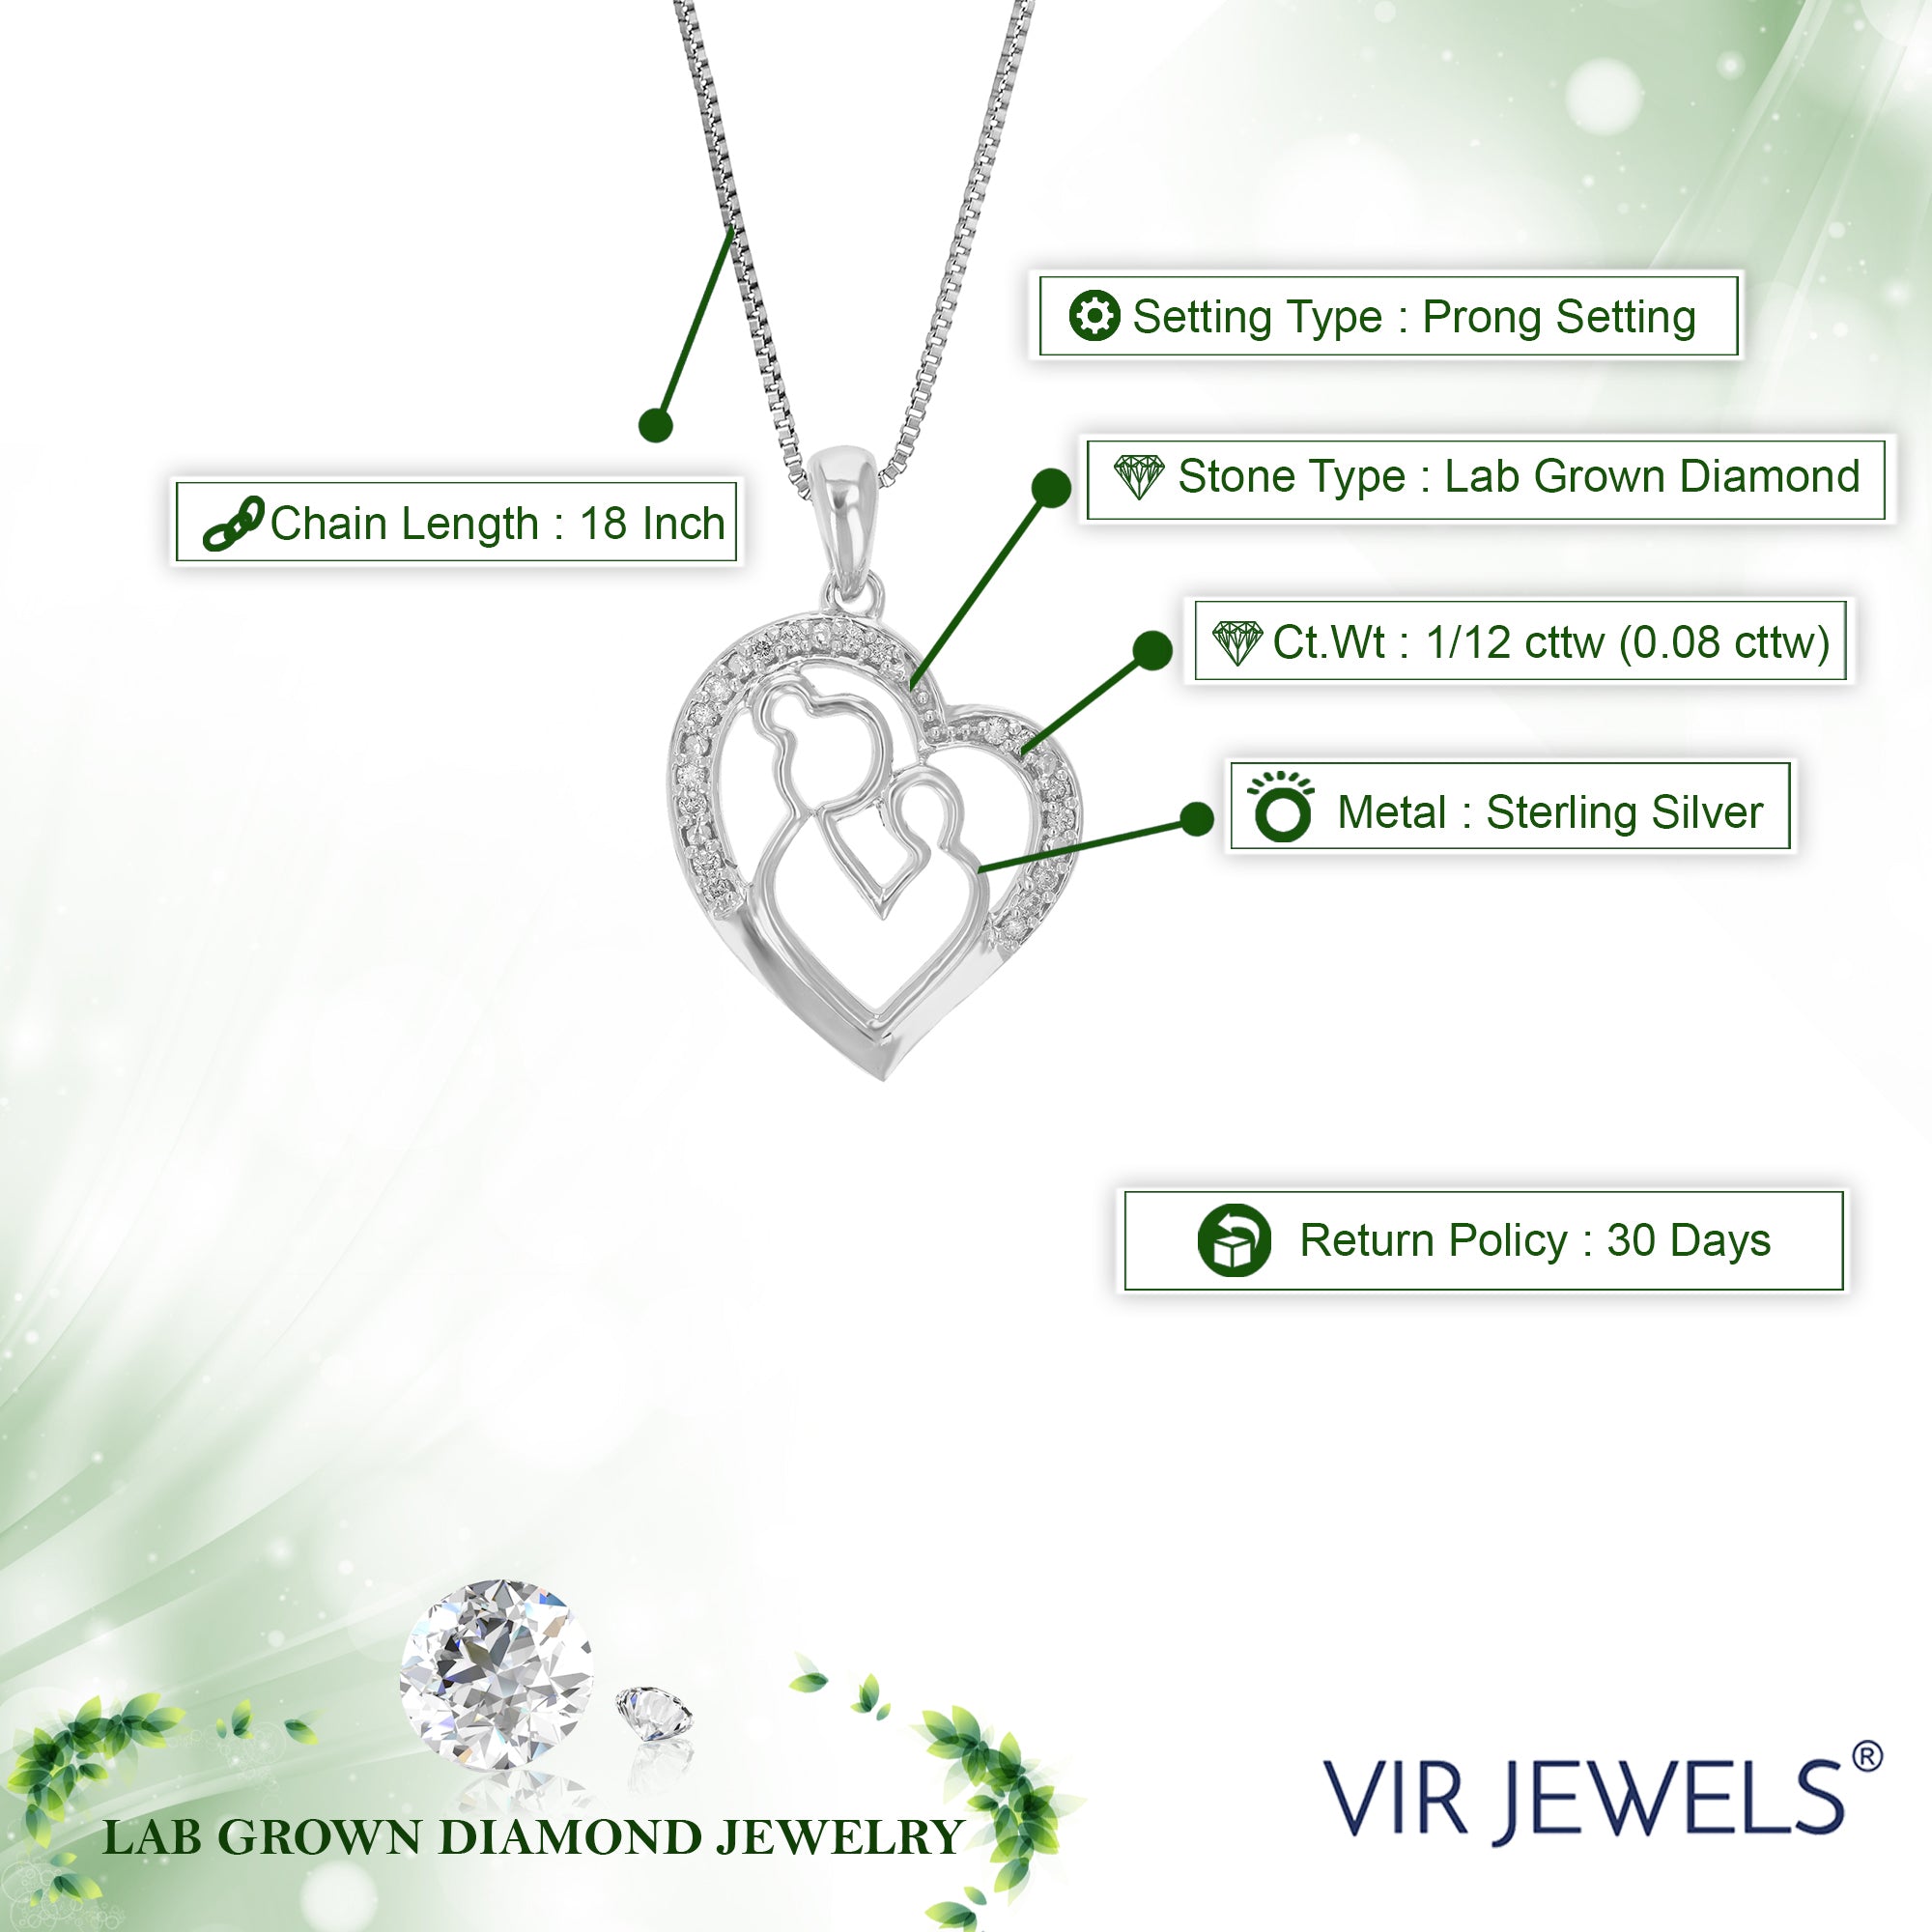 1/12 cttw Diamond Pendant Necklace for Women, Lab Grown Diamond Heart Pendant Necklace in .925 Sterling Silver with Chain, Size 3/4 Inch